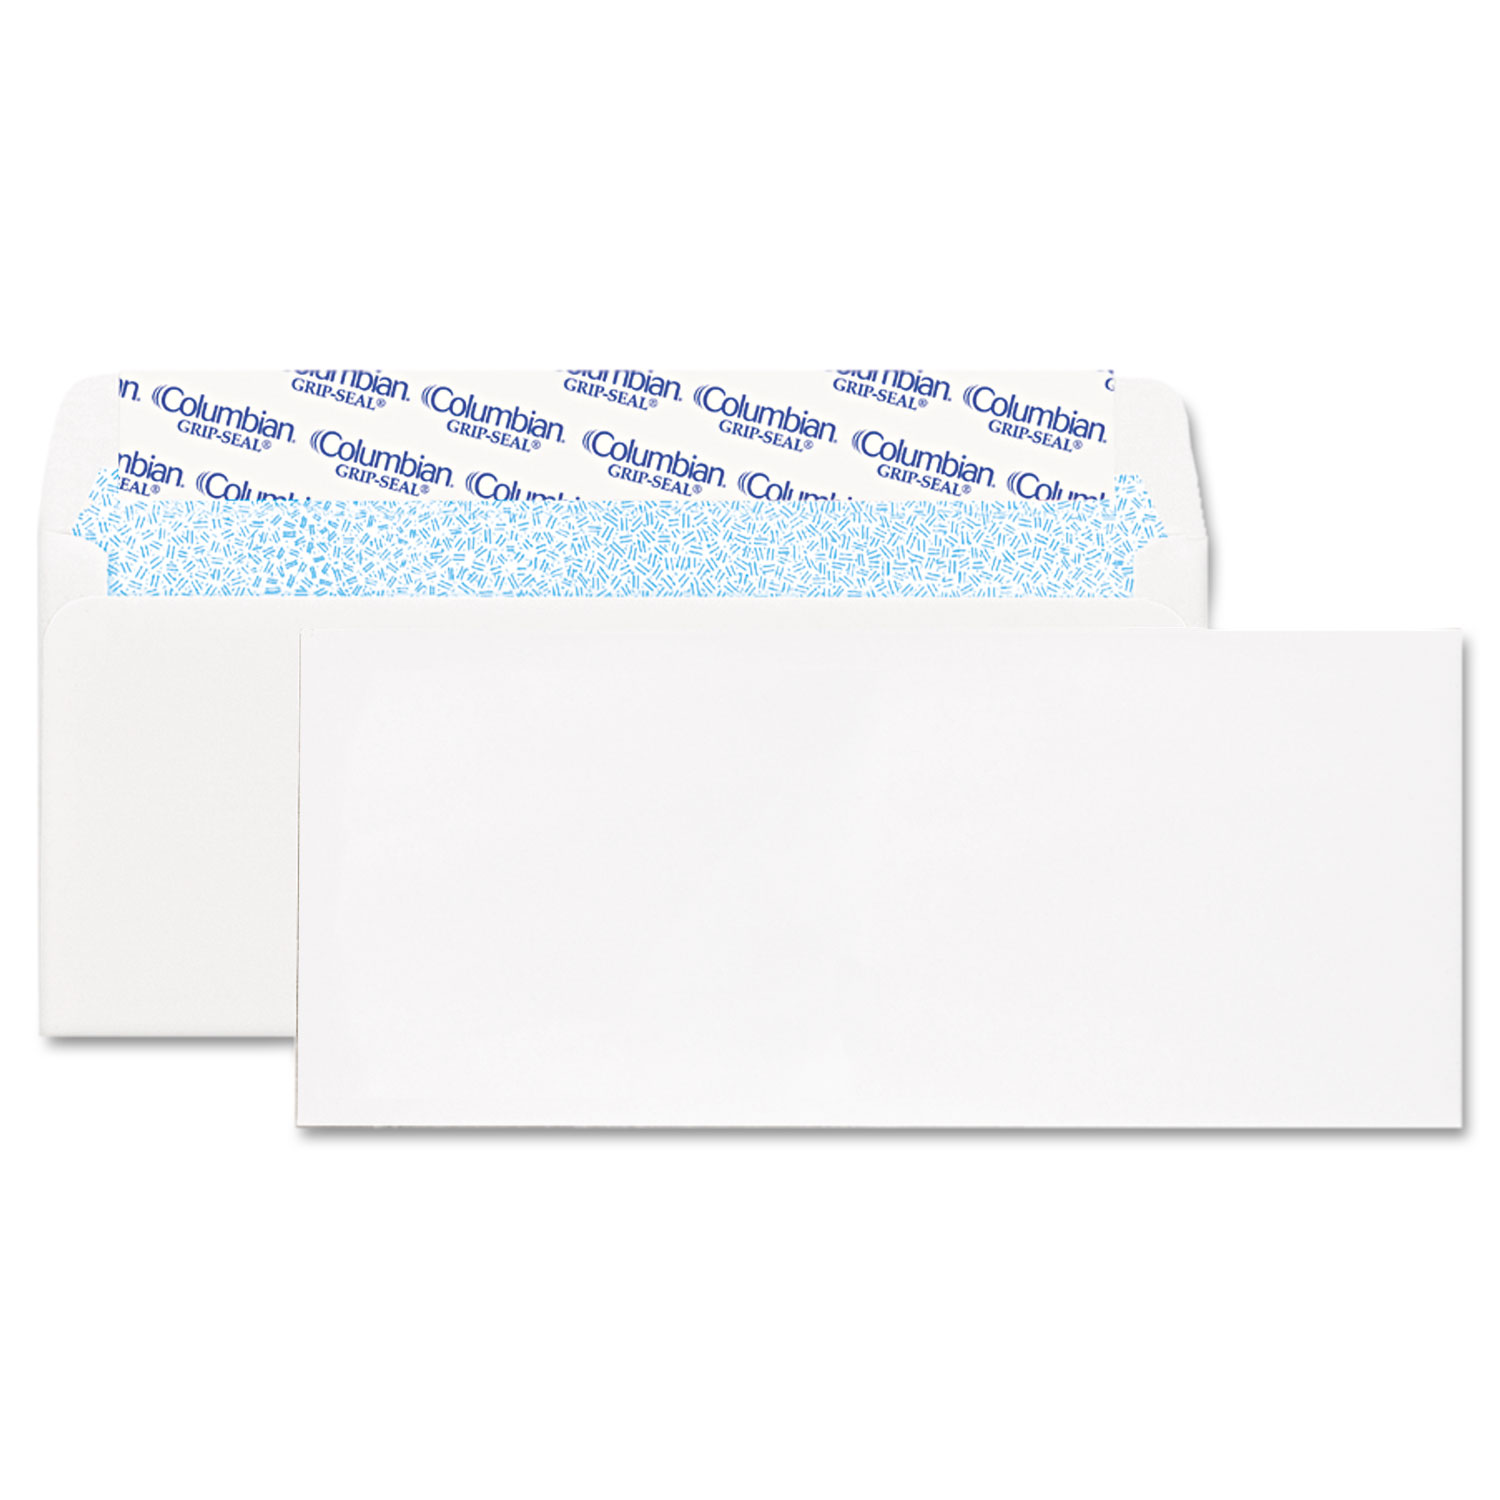 Grip-Seal Security Tint Business Envelope, #6 3/4, 3 5/8 x 6 1/2, White, 55/Box